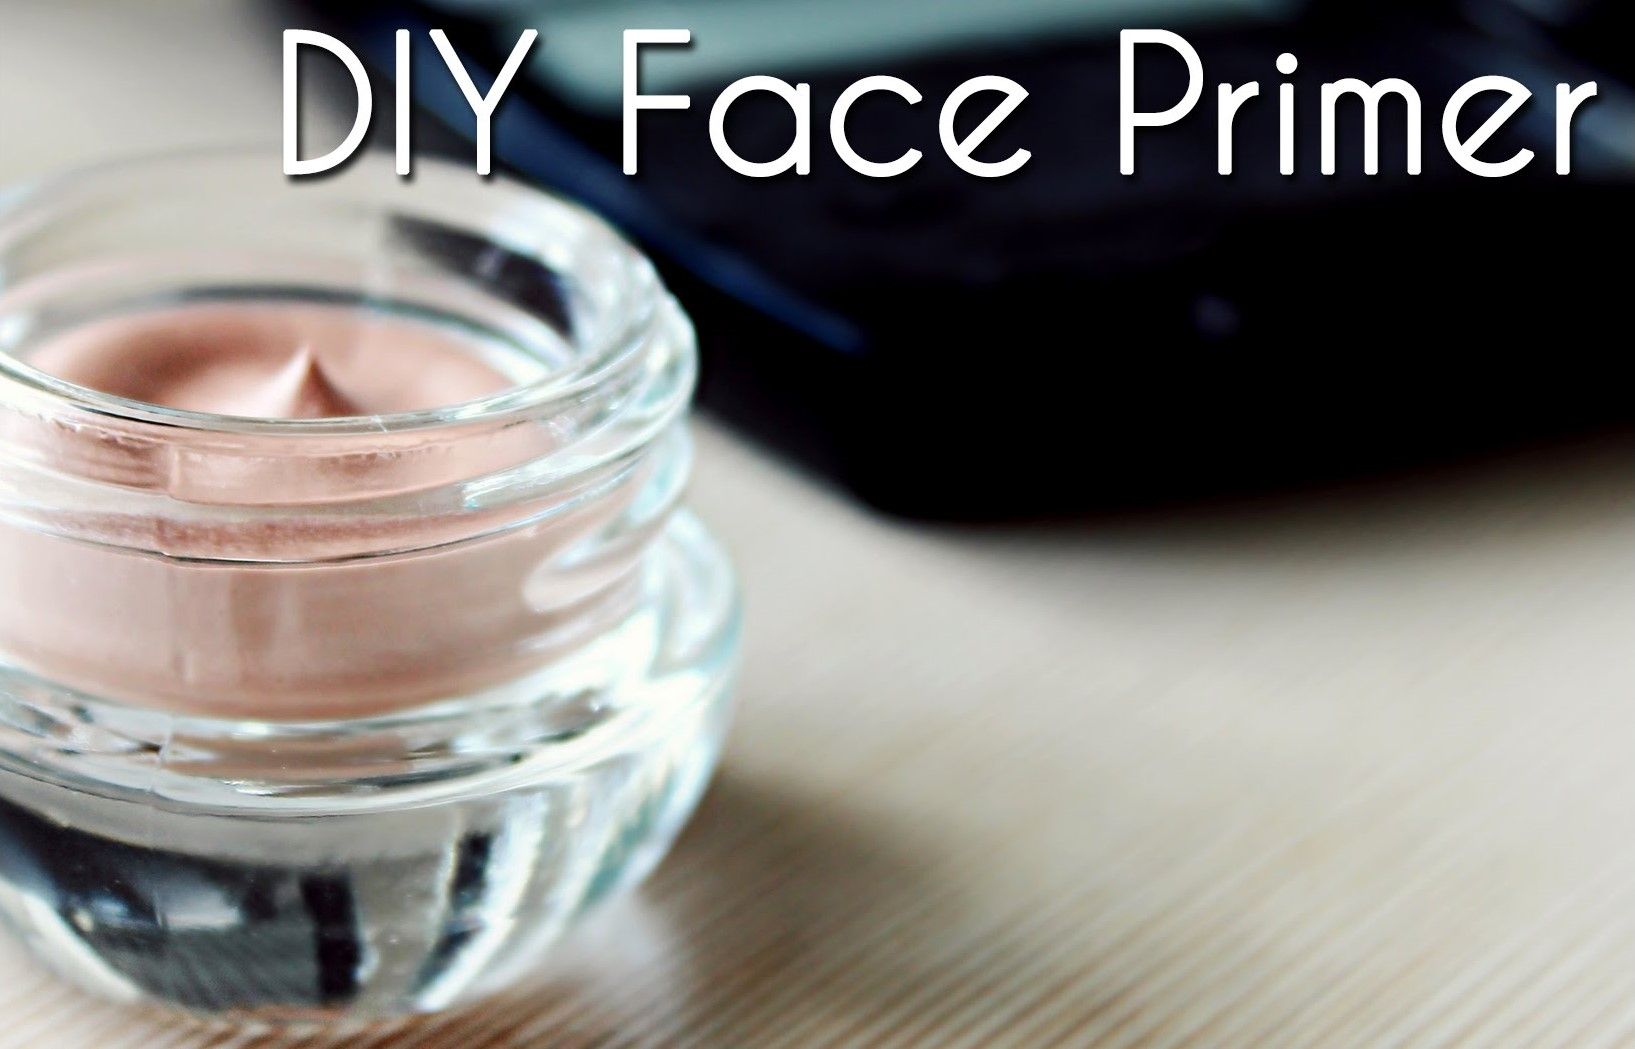 Wax for face primer. Primer Home. Праймер видео